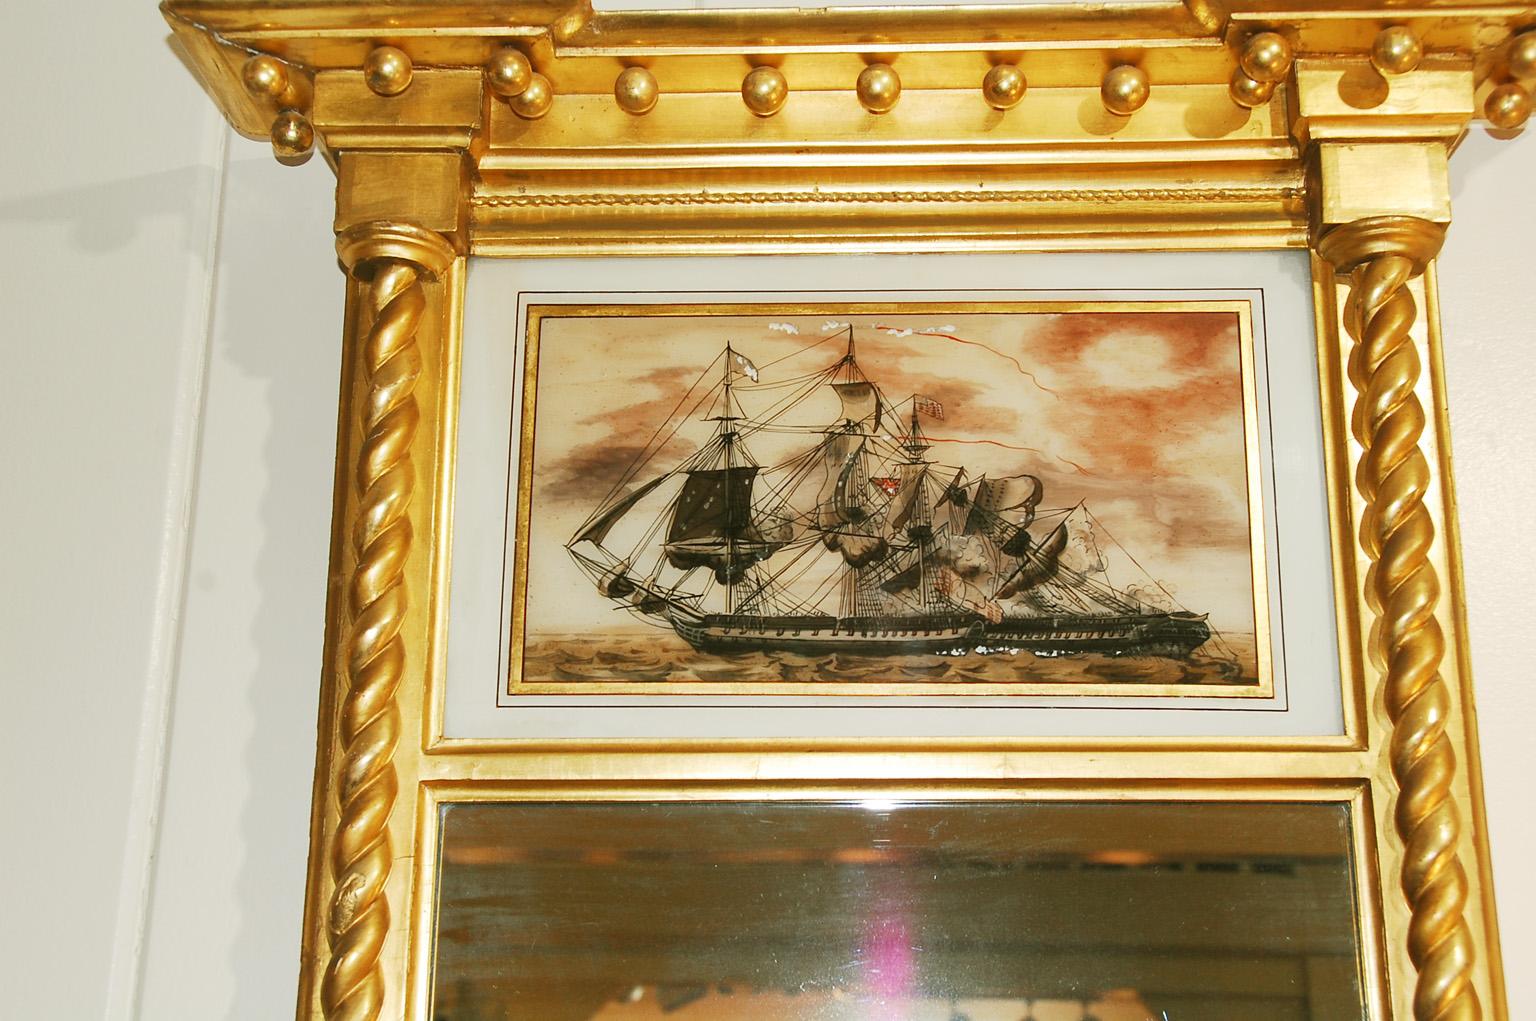 American Federal period gold leaf mirror with beautifully carved rope columns, eglomise panel and deep cornice with pendant balls. The reverse painting on glass depicts a battle between an American ship of the line and a British ship of the line,